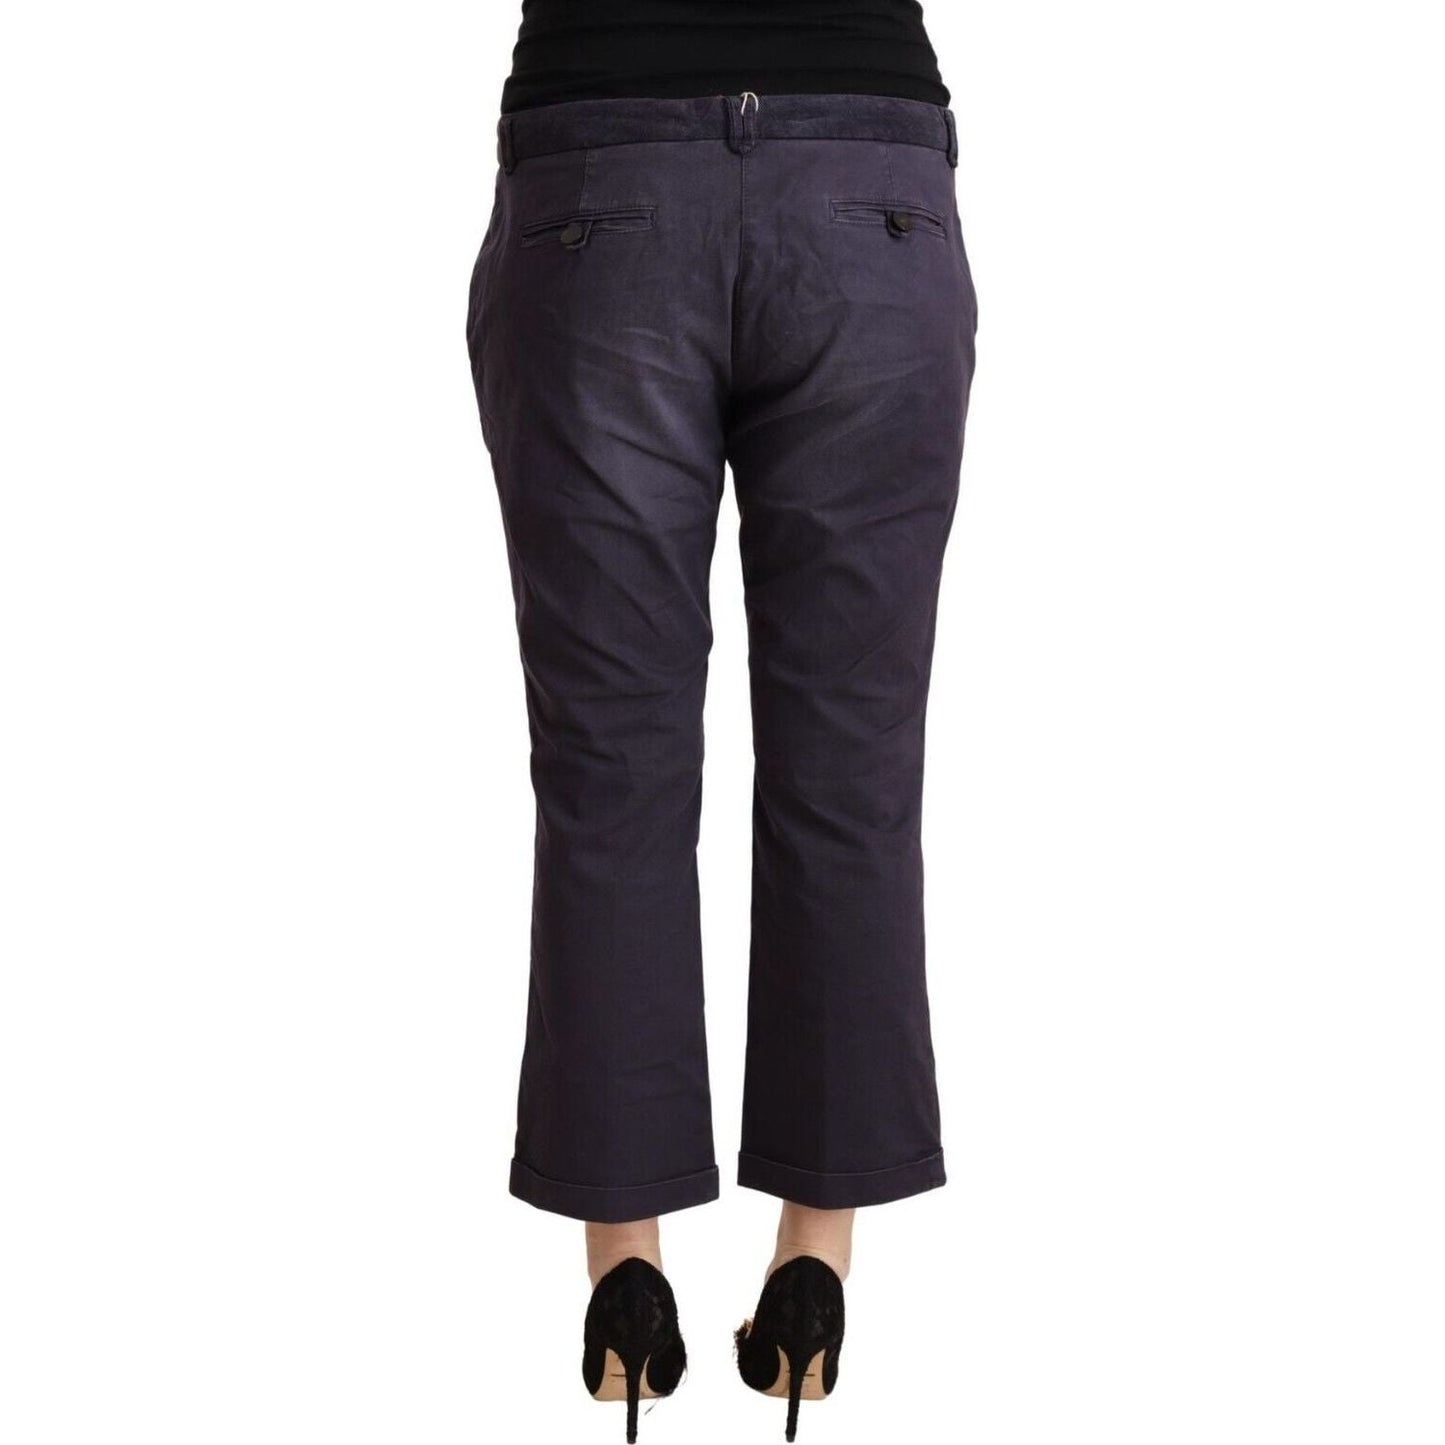 JuccaChic Low Waist Cropped Pants in BlackMcRichard Designer Brands£209.00